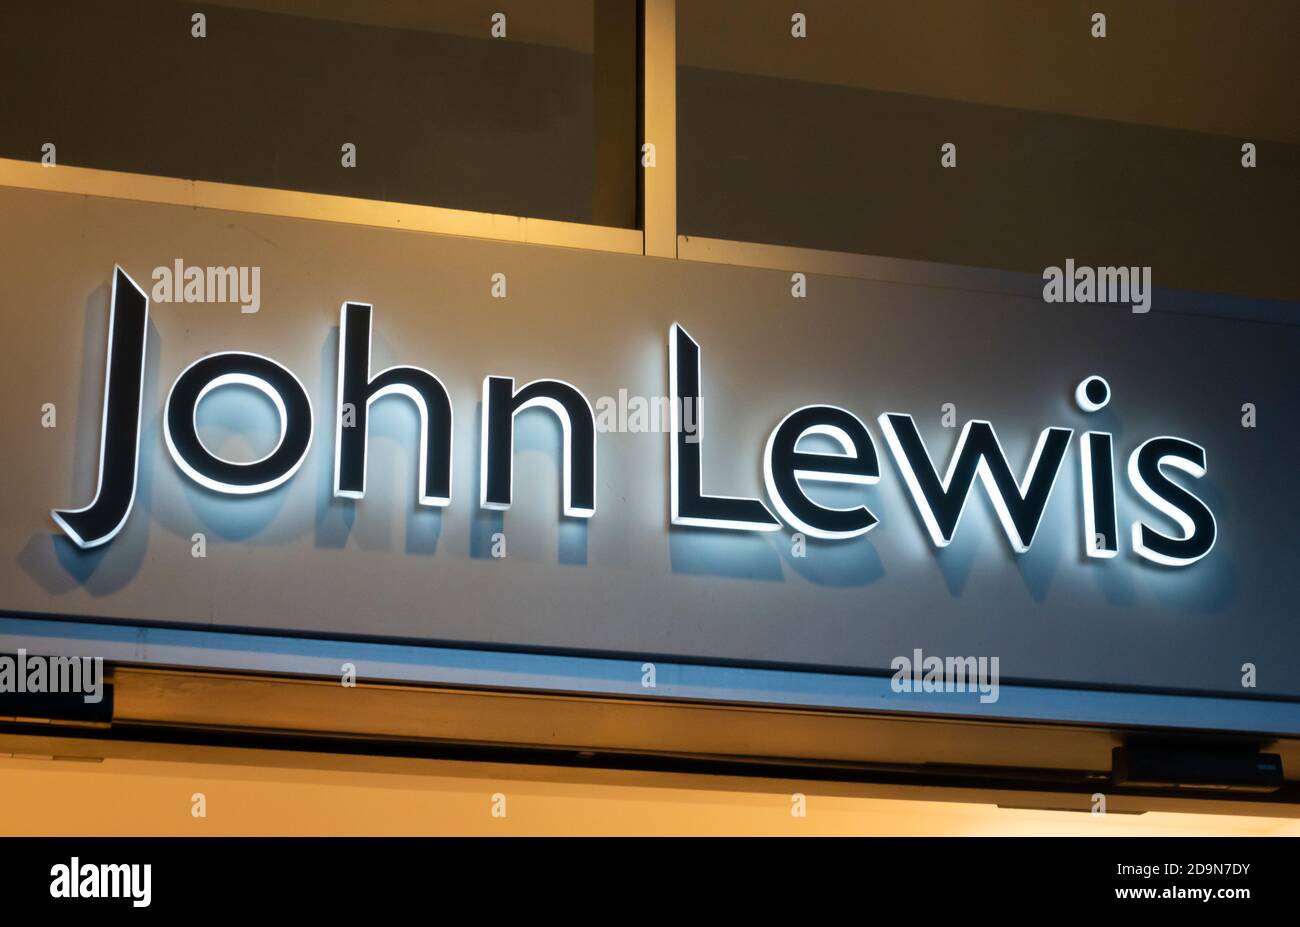 John Lewis department store sign on the entrance in Liverpool, England UK Stock Photo